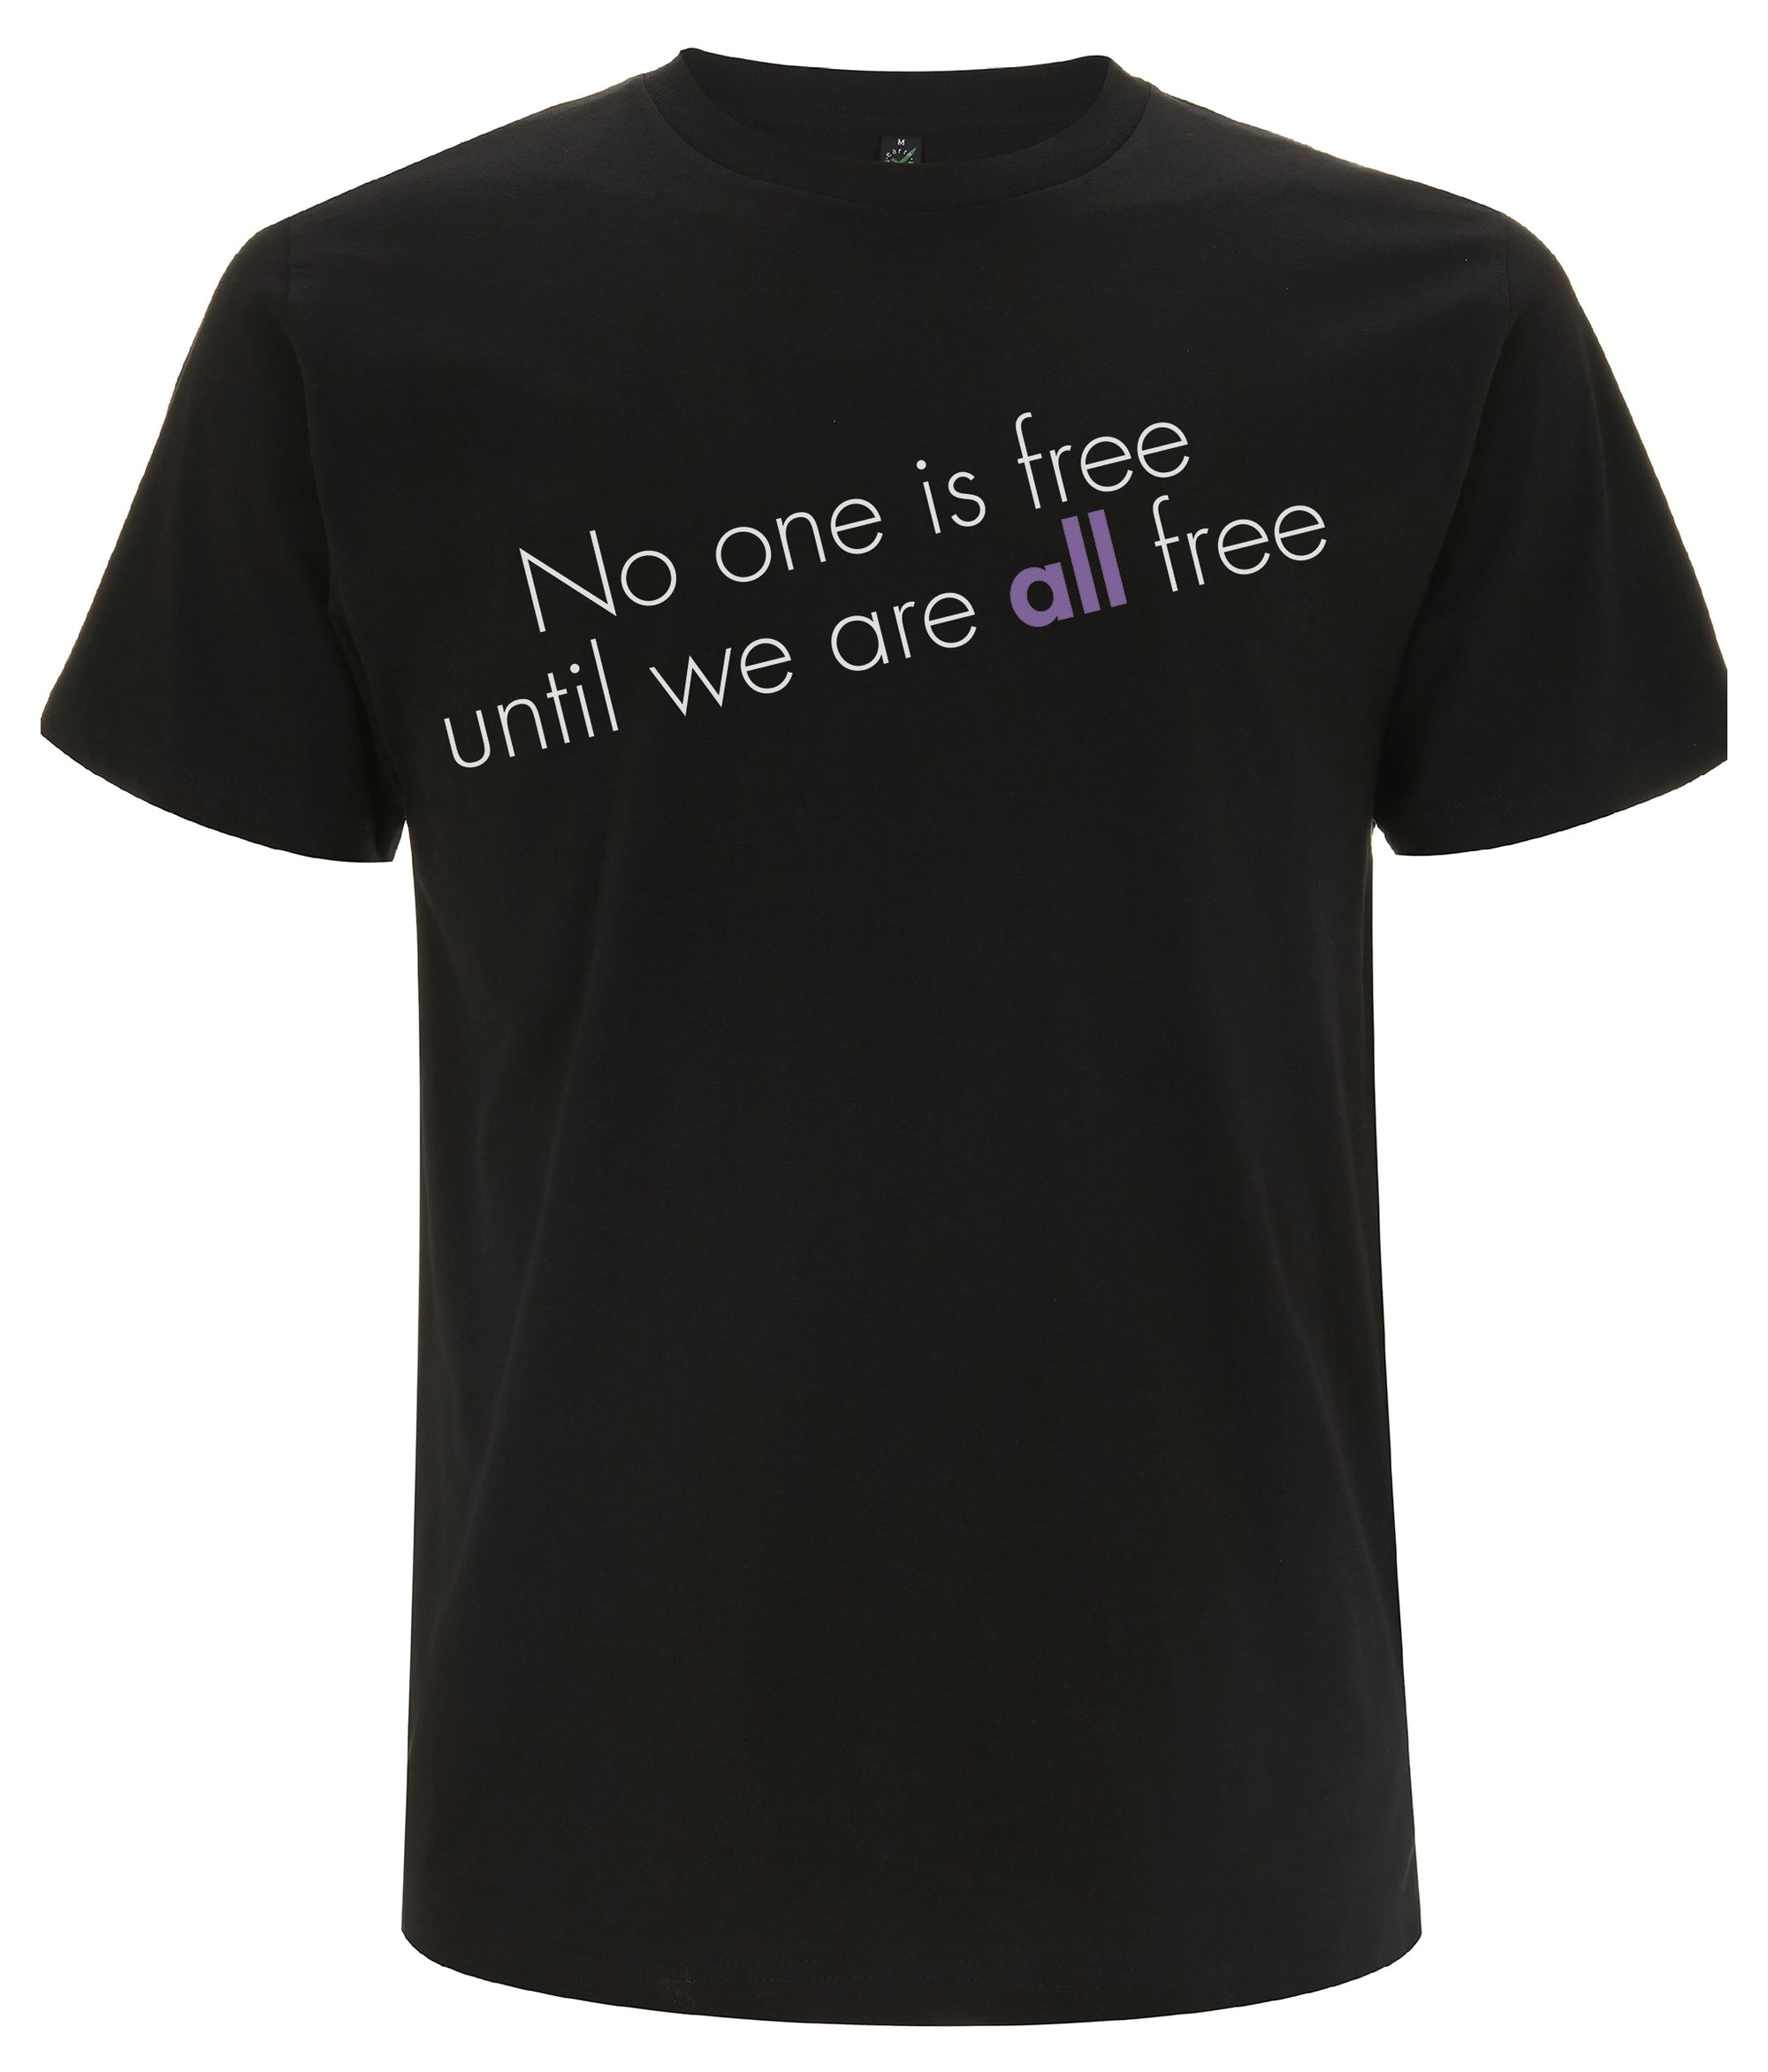 No One Is Free Until We Are All Free Organic Feminist T Shirt Black